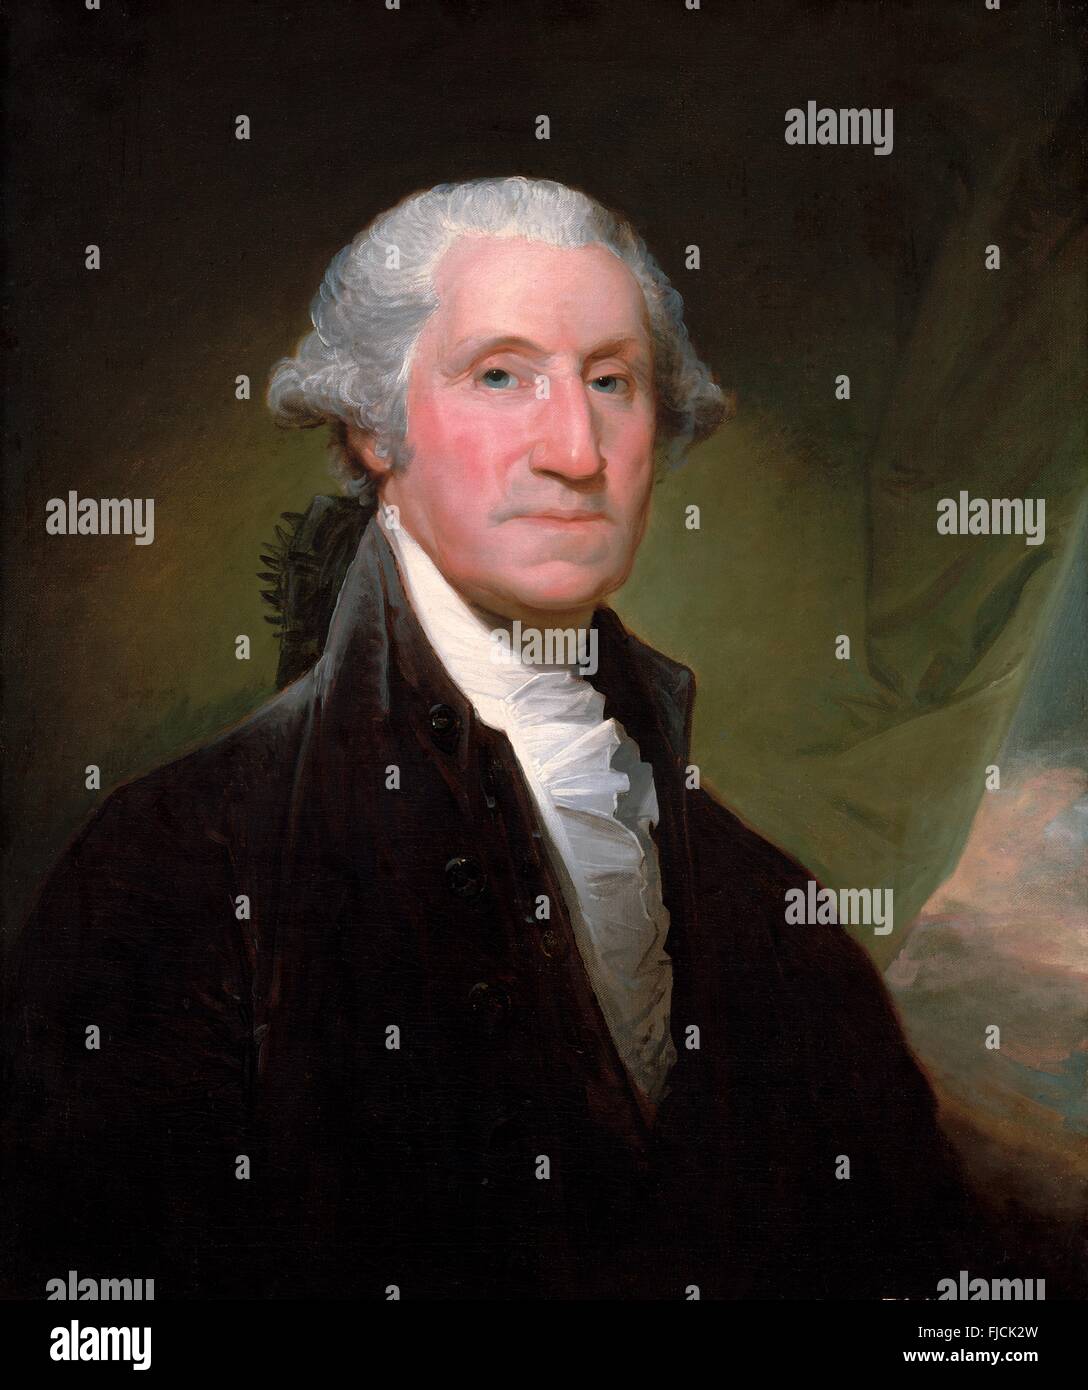 George Washington, 1st President of the United States official portrait painting by George Stuart, 1795. Stock Photo